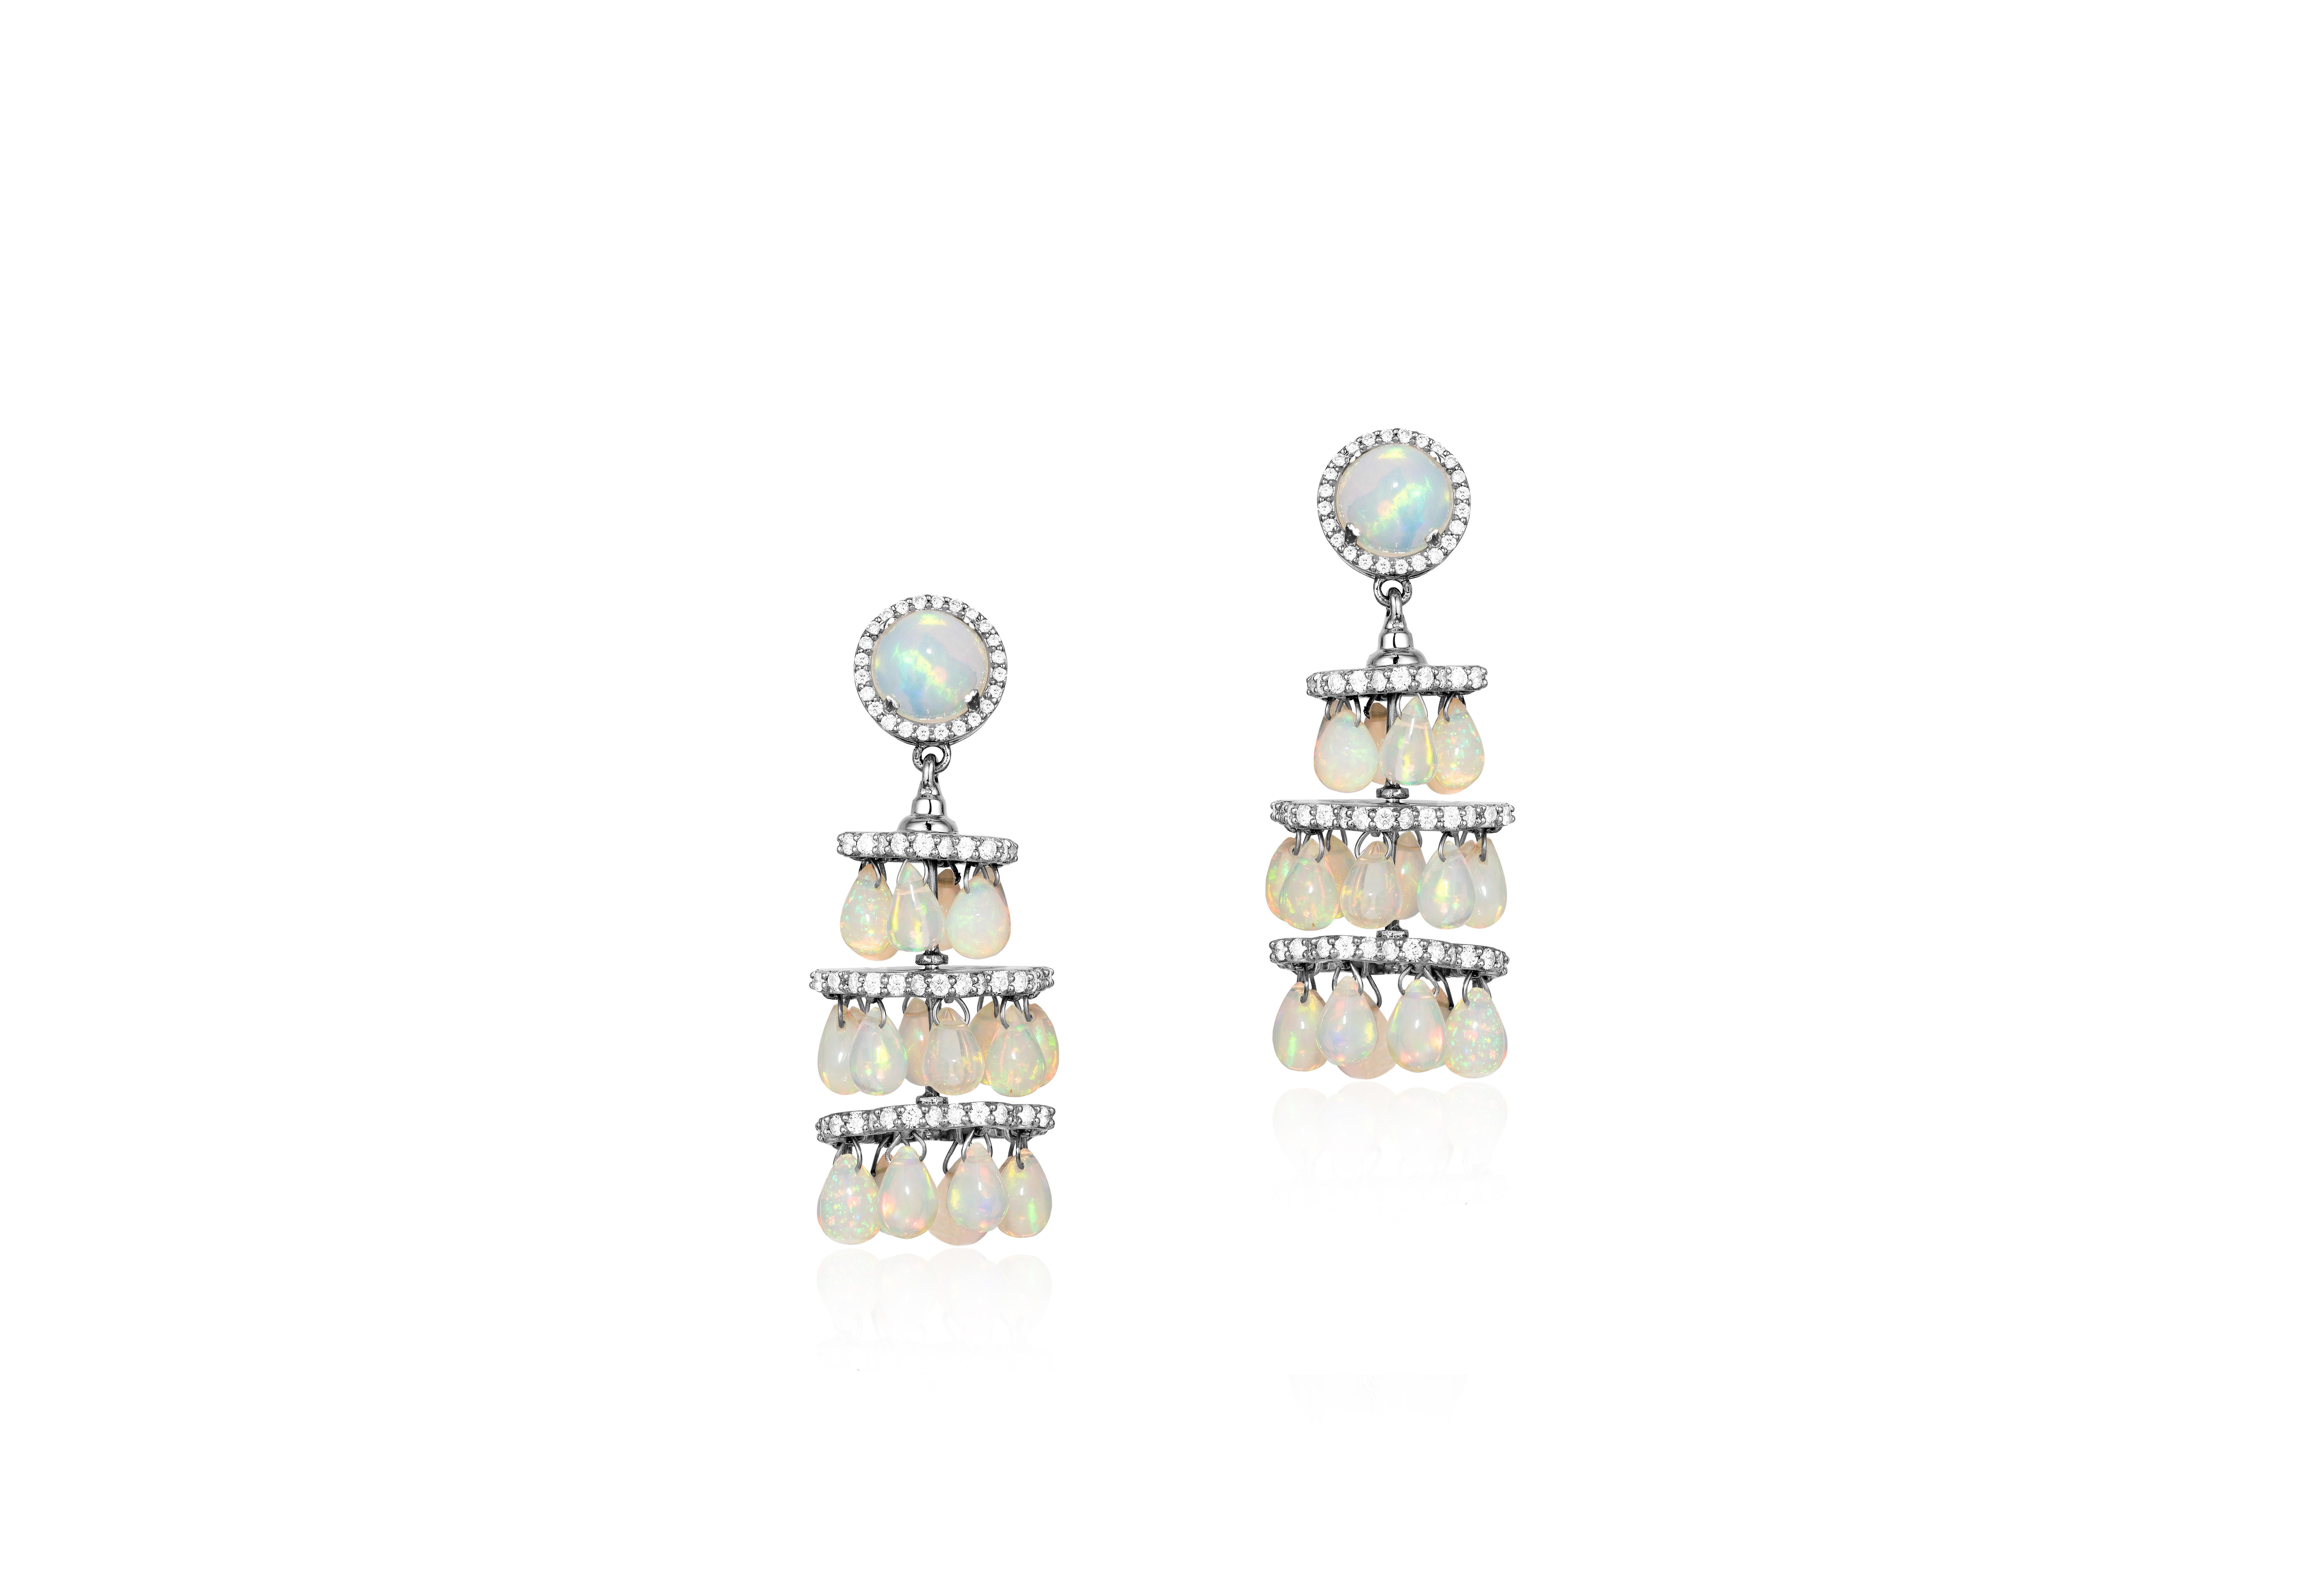 Opal Chandelier Earrings with Diamonds in 18K White Gold, from 'G-One' Collection

Stone Size: 8 & 6 x 4 mm

